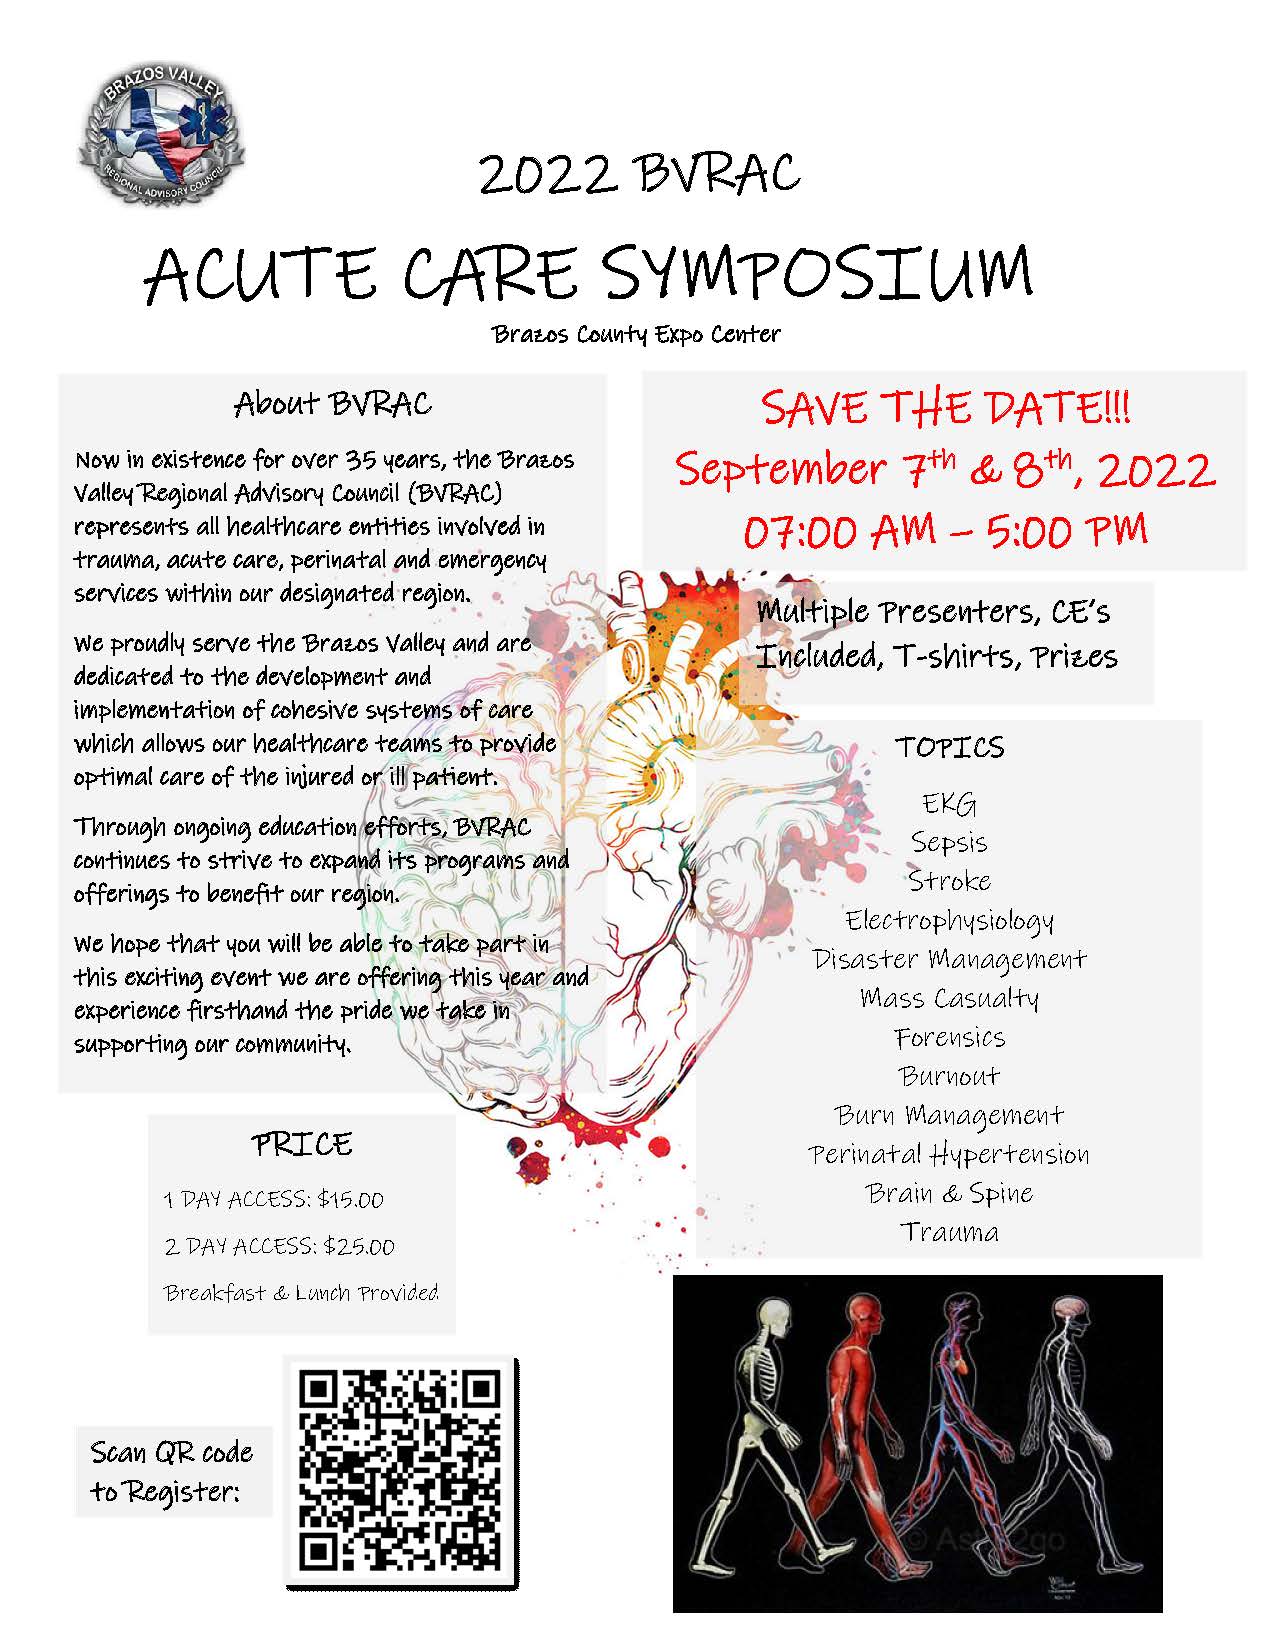 2022 BVRAC ACUTE CARE SYMPOSIUM

Brazos County Expo Center

SAVE THE DATE!!! September 7th & 8th, 2022 07:00 AM – 5:00 PM